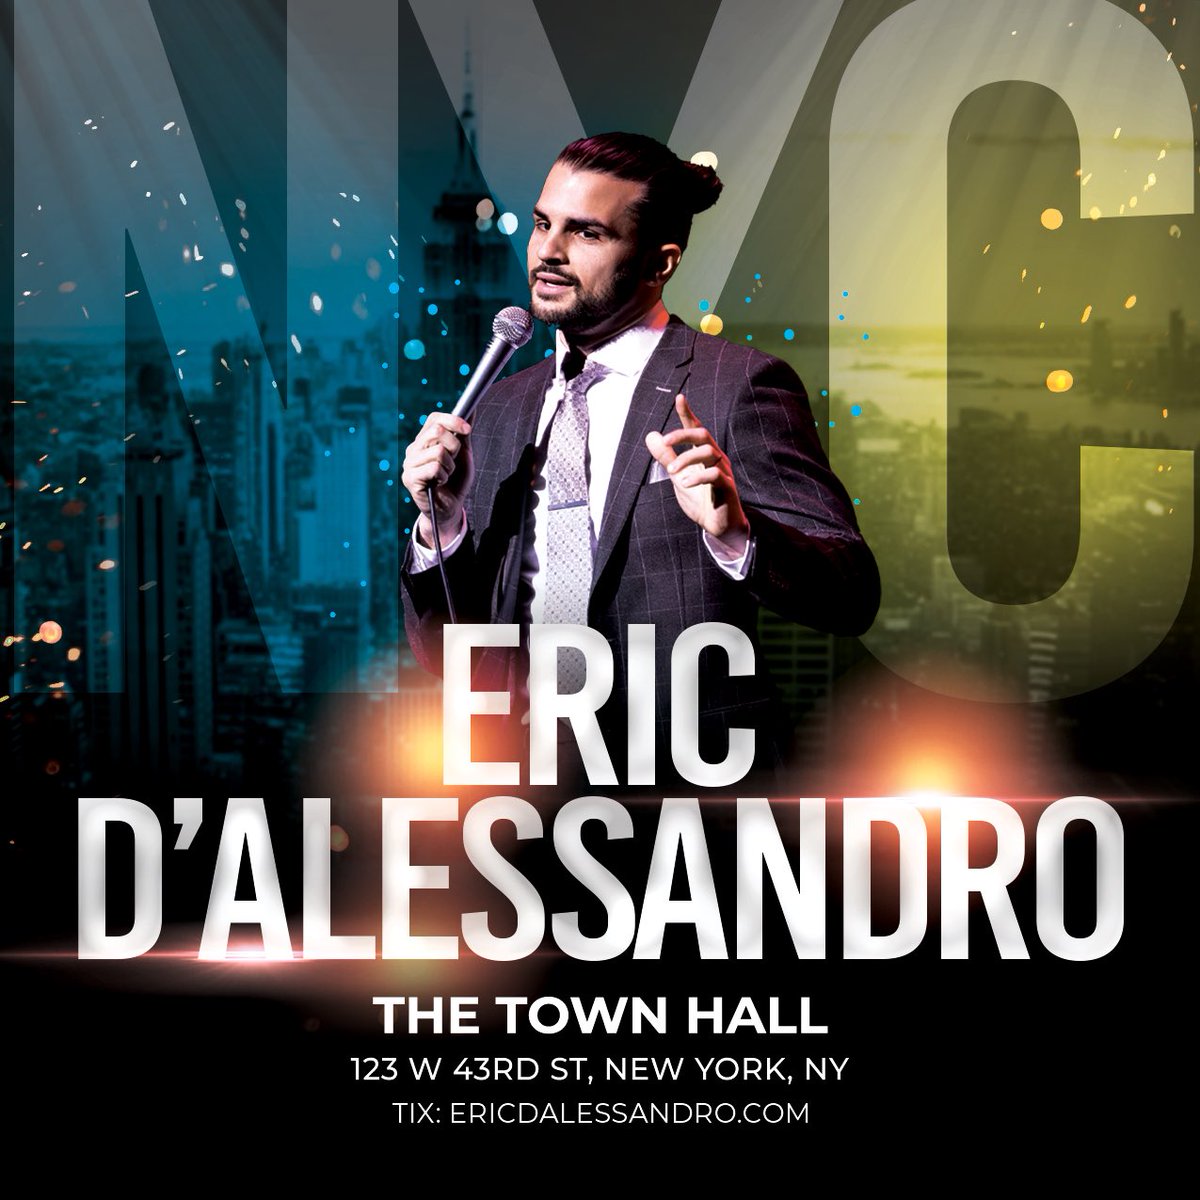 NYC! March 30th! ticketmaster.com/an-evening-wit…